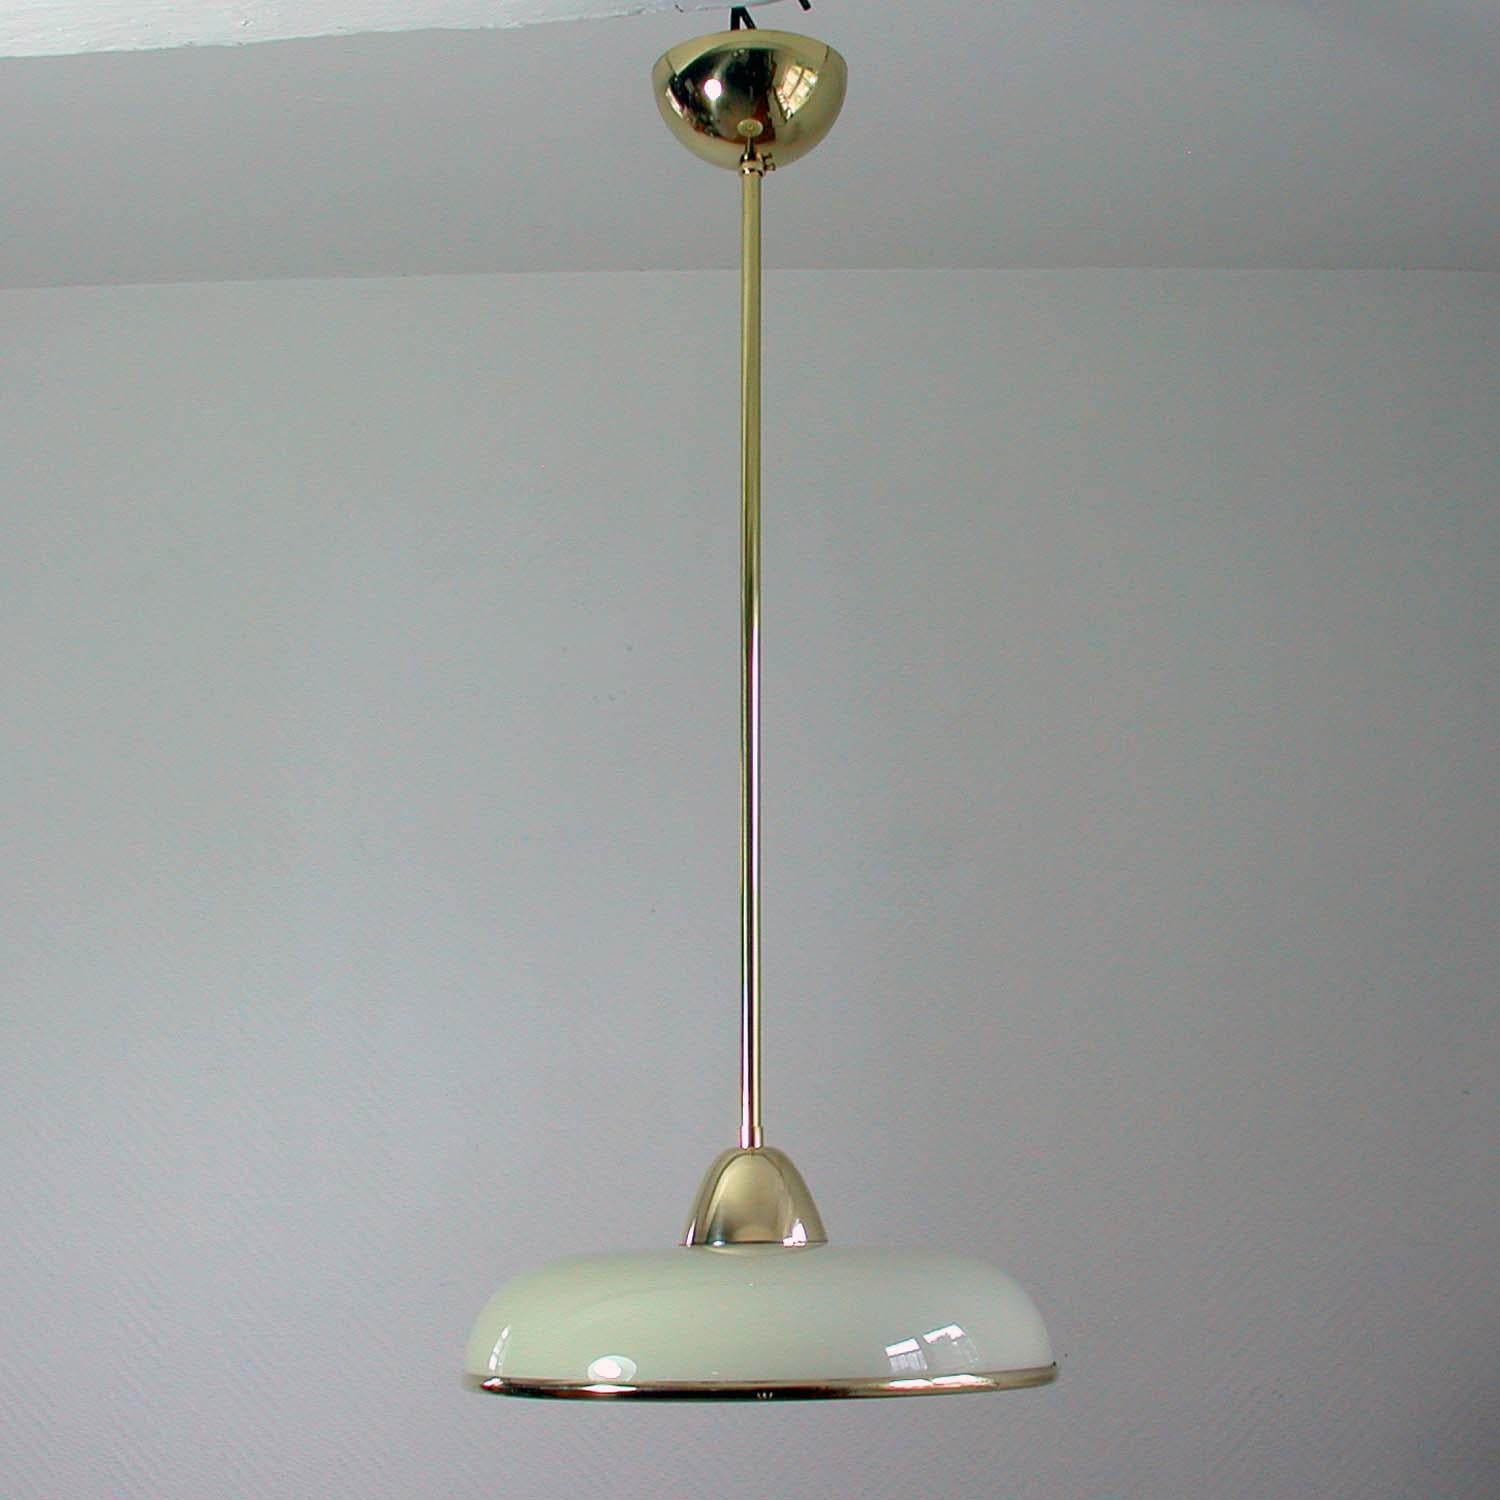 This elegant German pendant was designed and made in Germany in the 1930s. The lamp is made of brass and has got a cream colored Opaline glass shade in typical Bauhaus design with a brass rim. Good vintage condition with one E27 socket.

The lamp